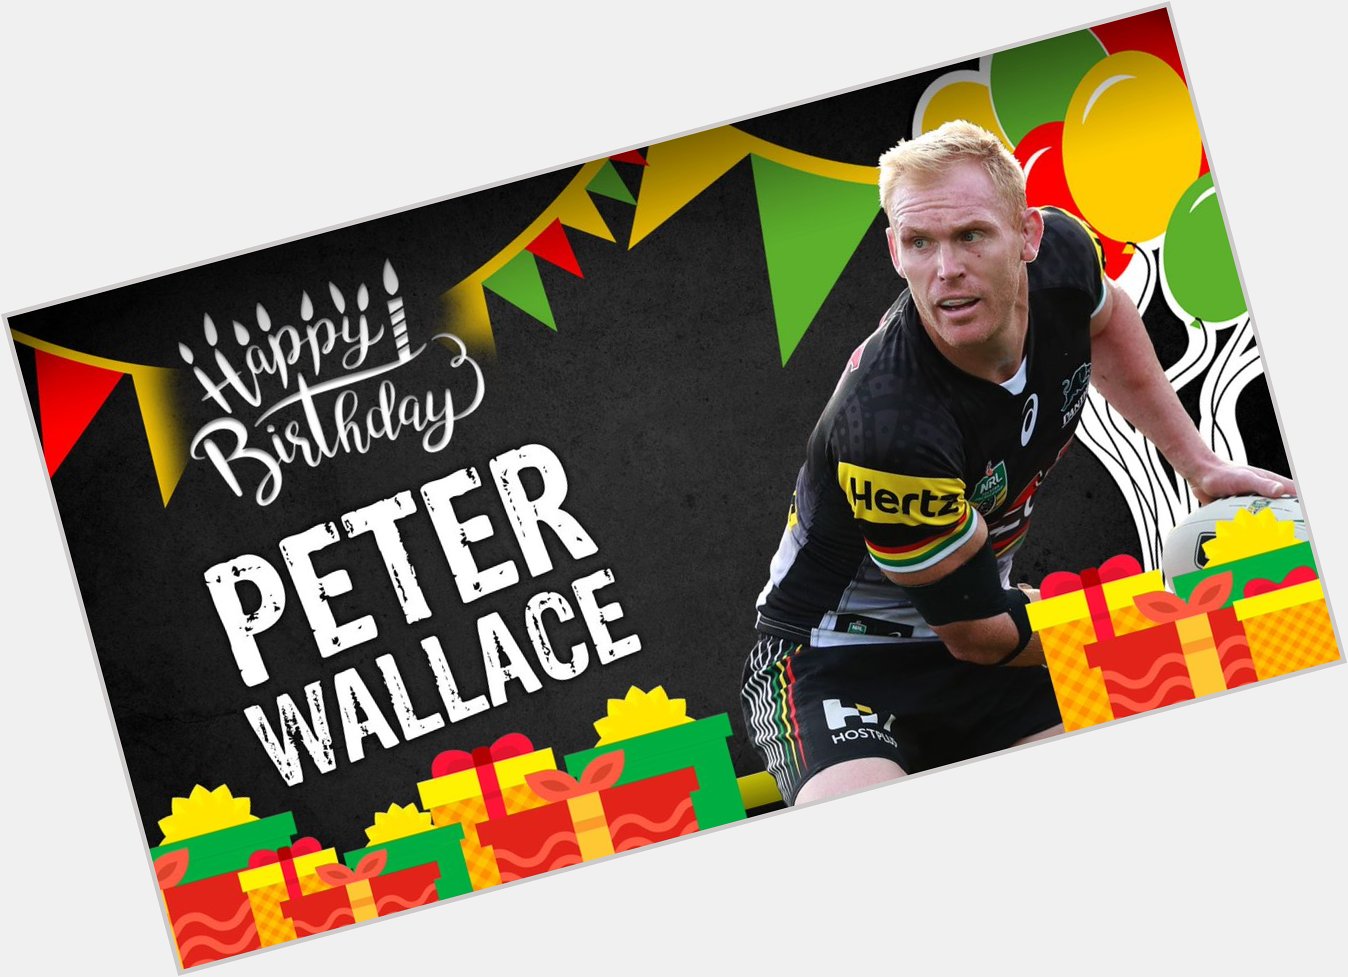 PARTY TIME   Join us in wishing Peter Wallace a very Happy Birthday!  